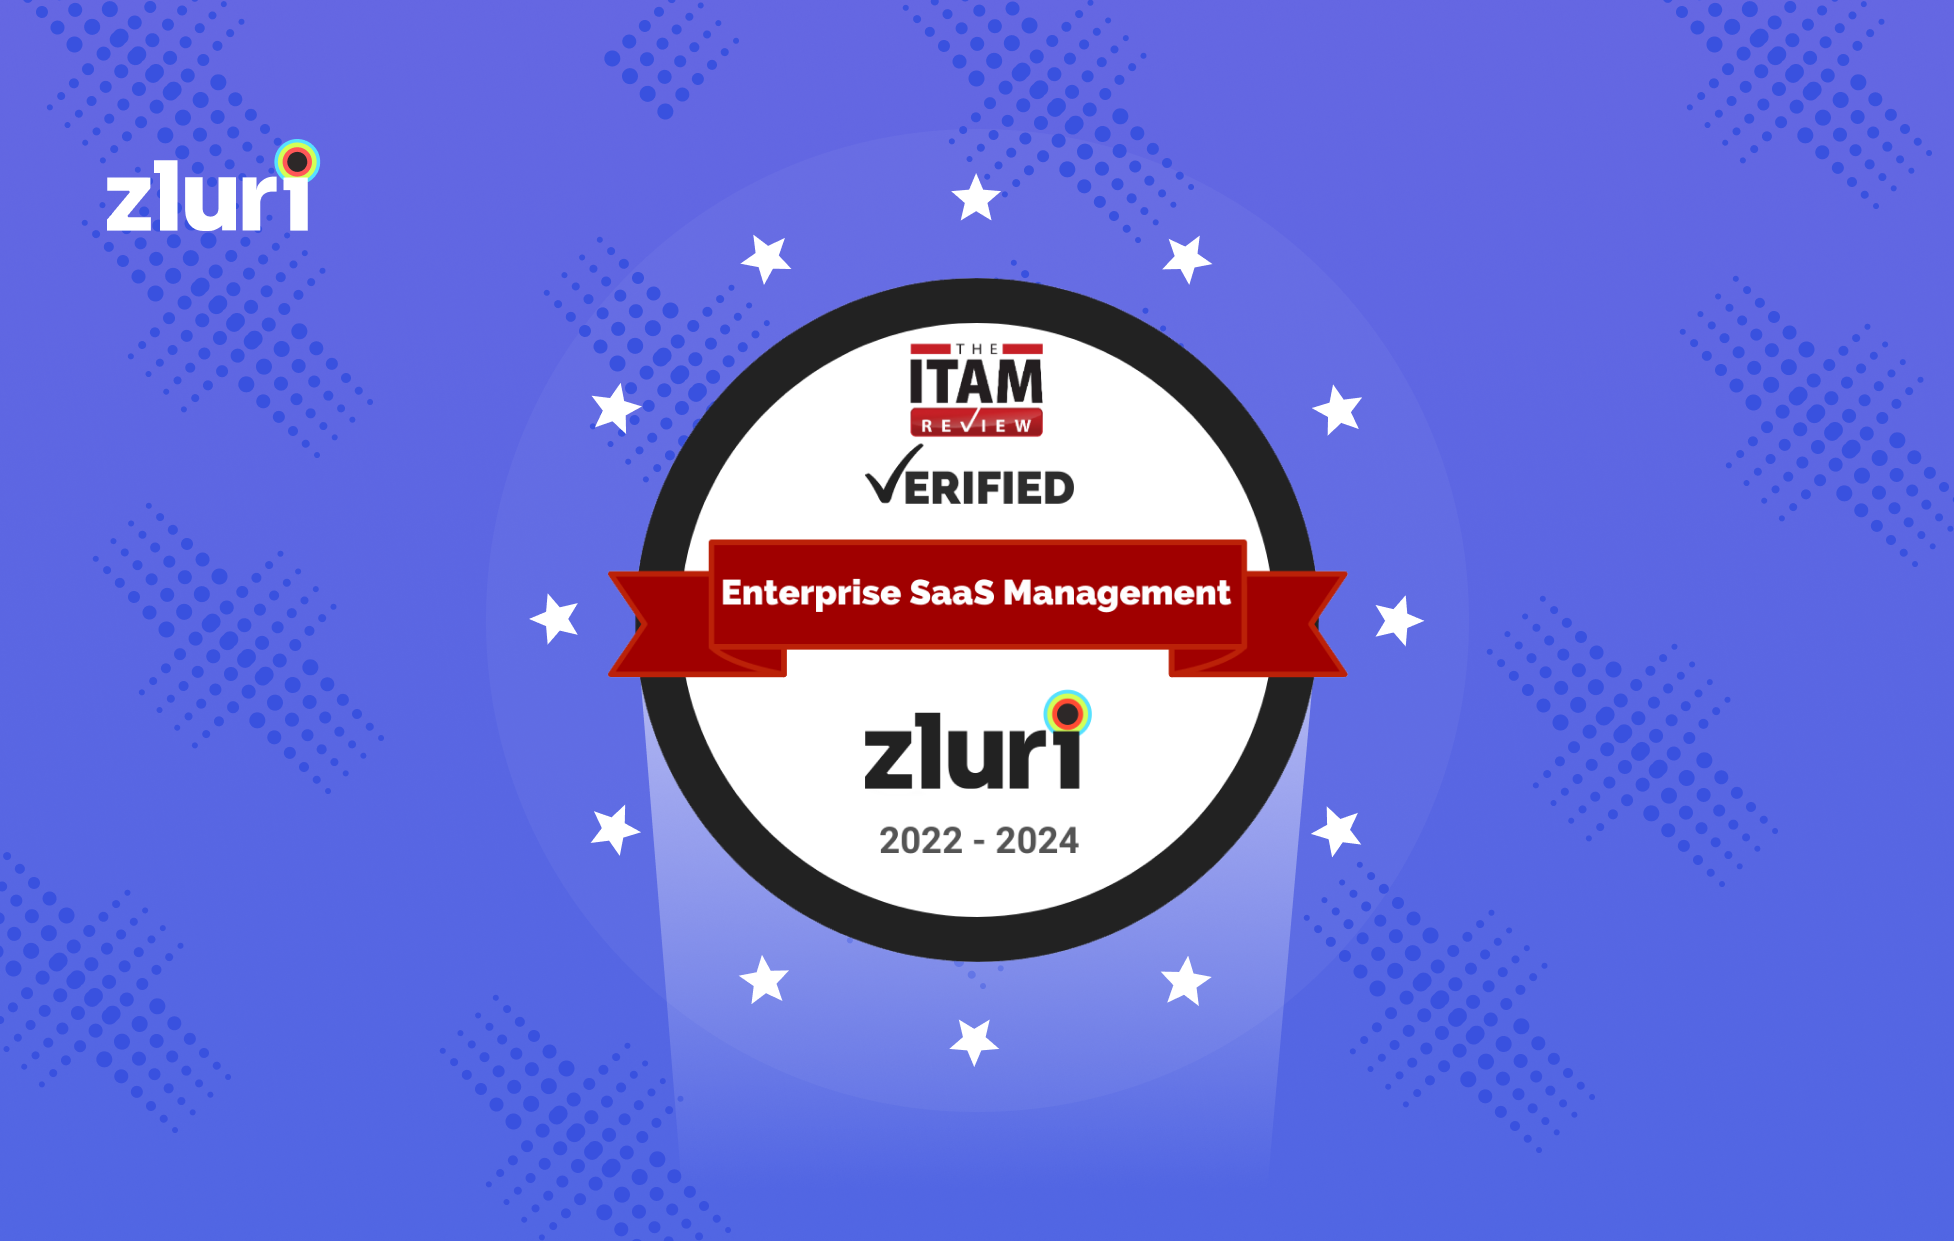 Zluri Awarded ITAM Review Certification for Enterprise SaaS Management- Featured Shot